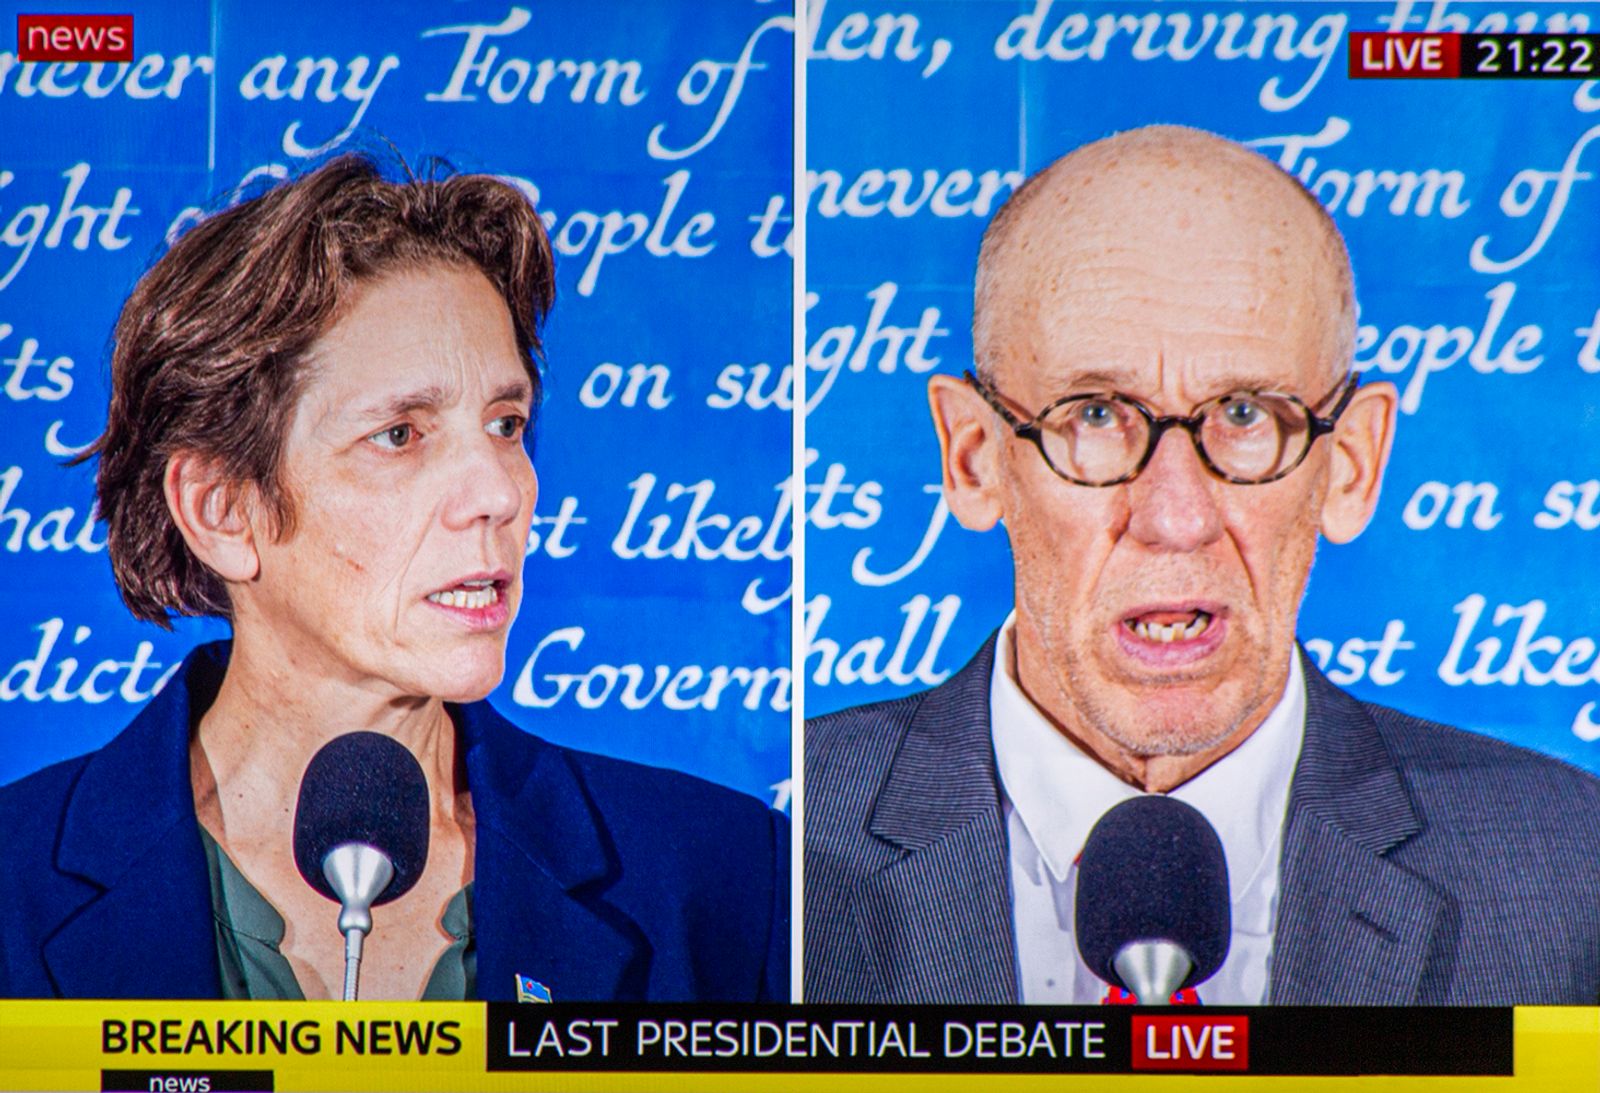 © Jesper Boot - Mom and dad at the final presidential debate (living room)